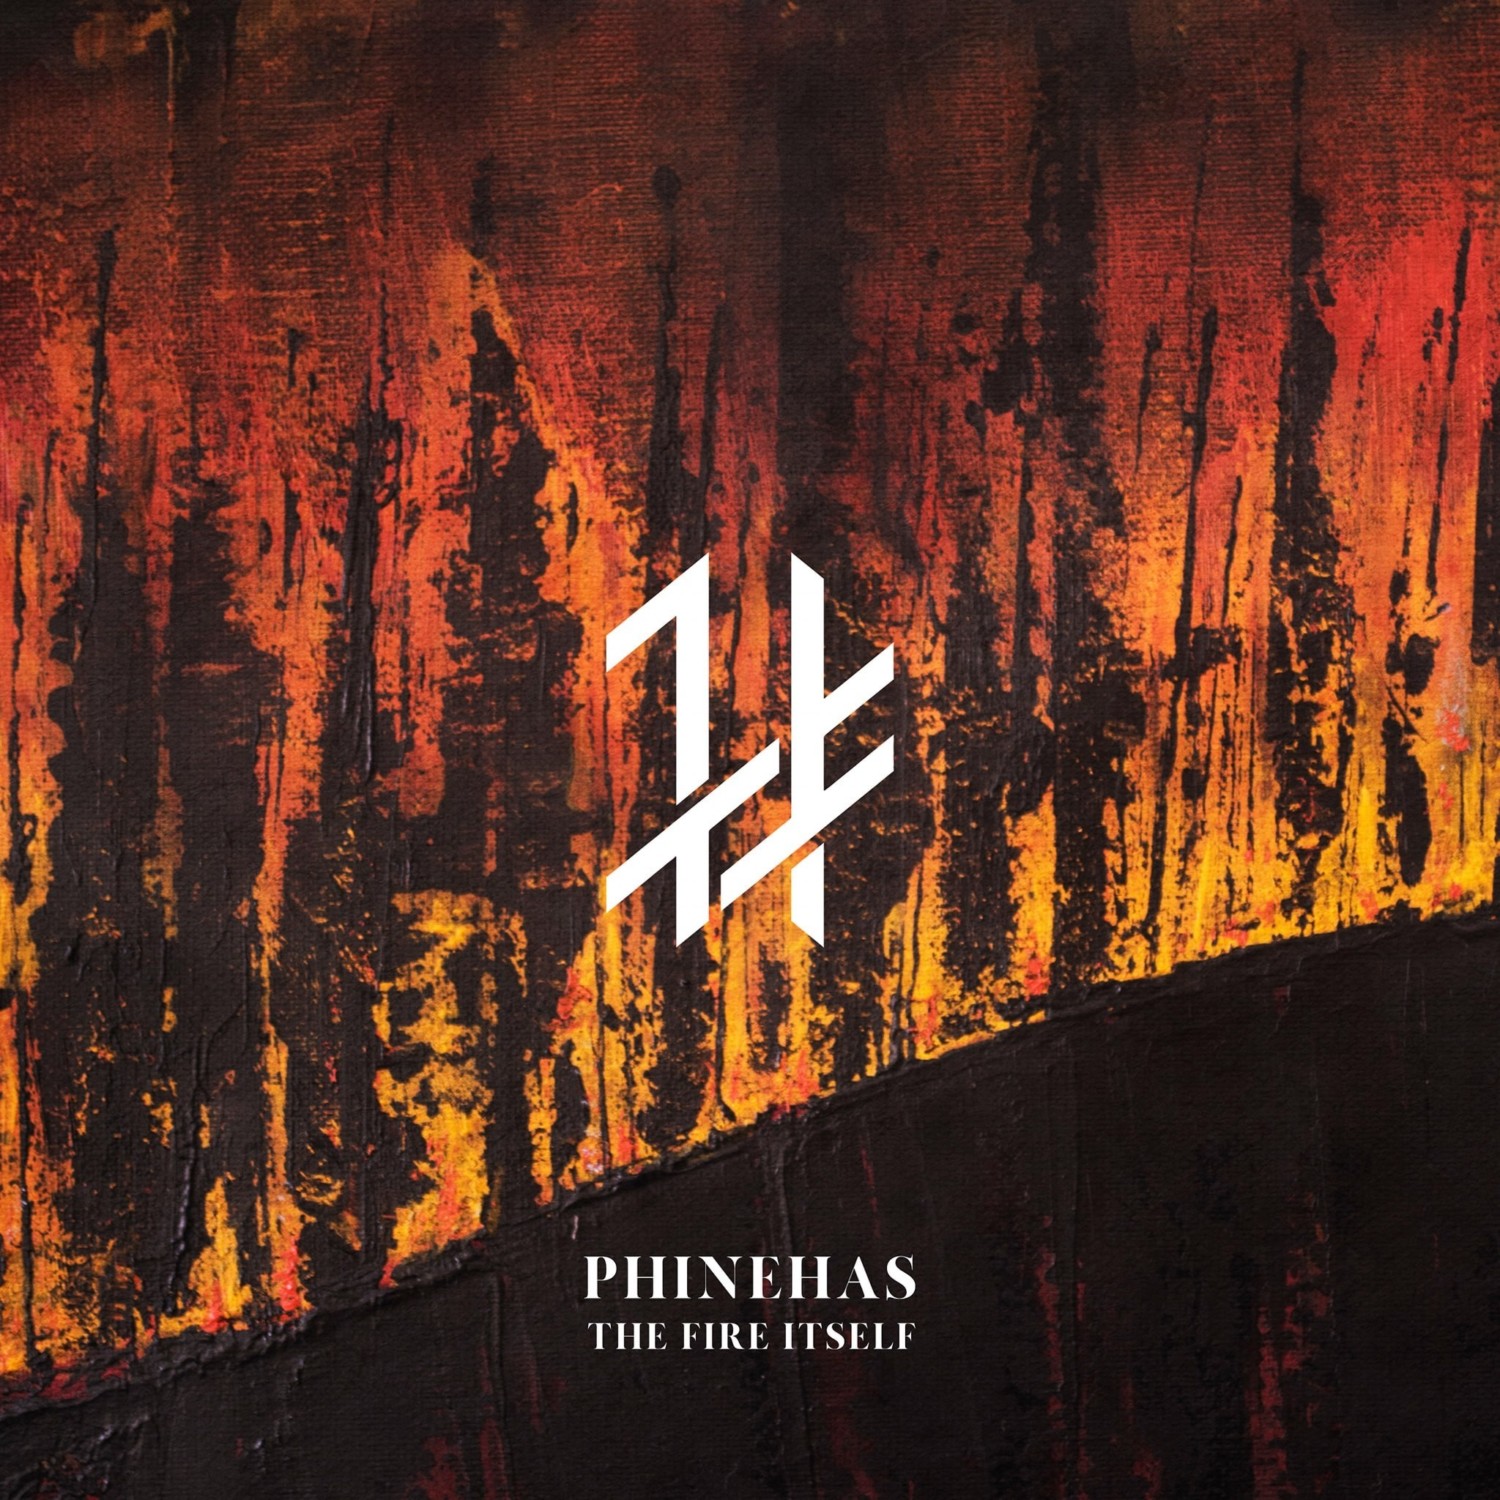 Phinehas Announce New Album in 2021 - News - Indie Vision Music